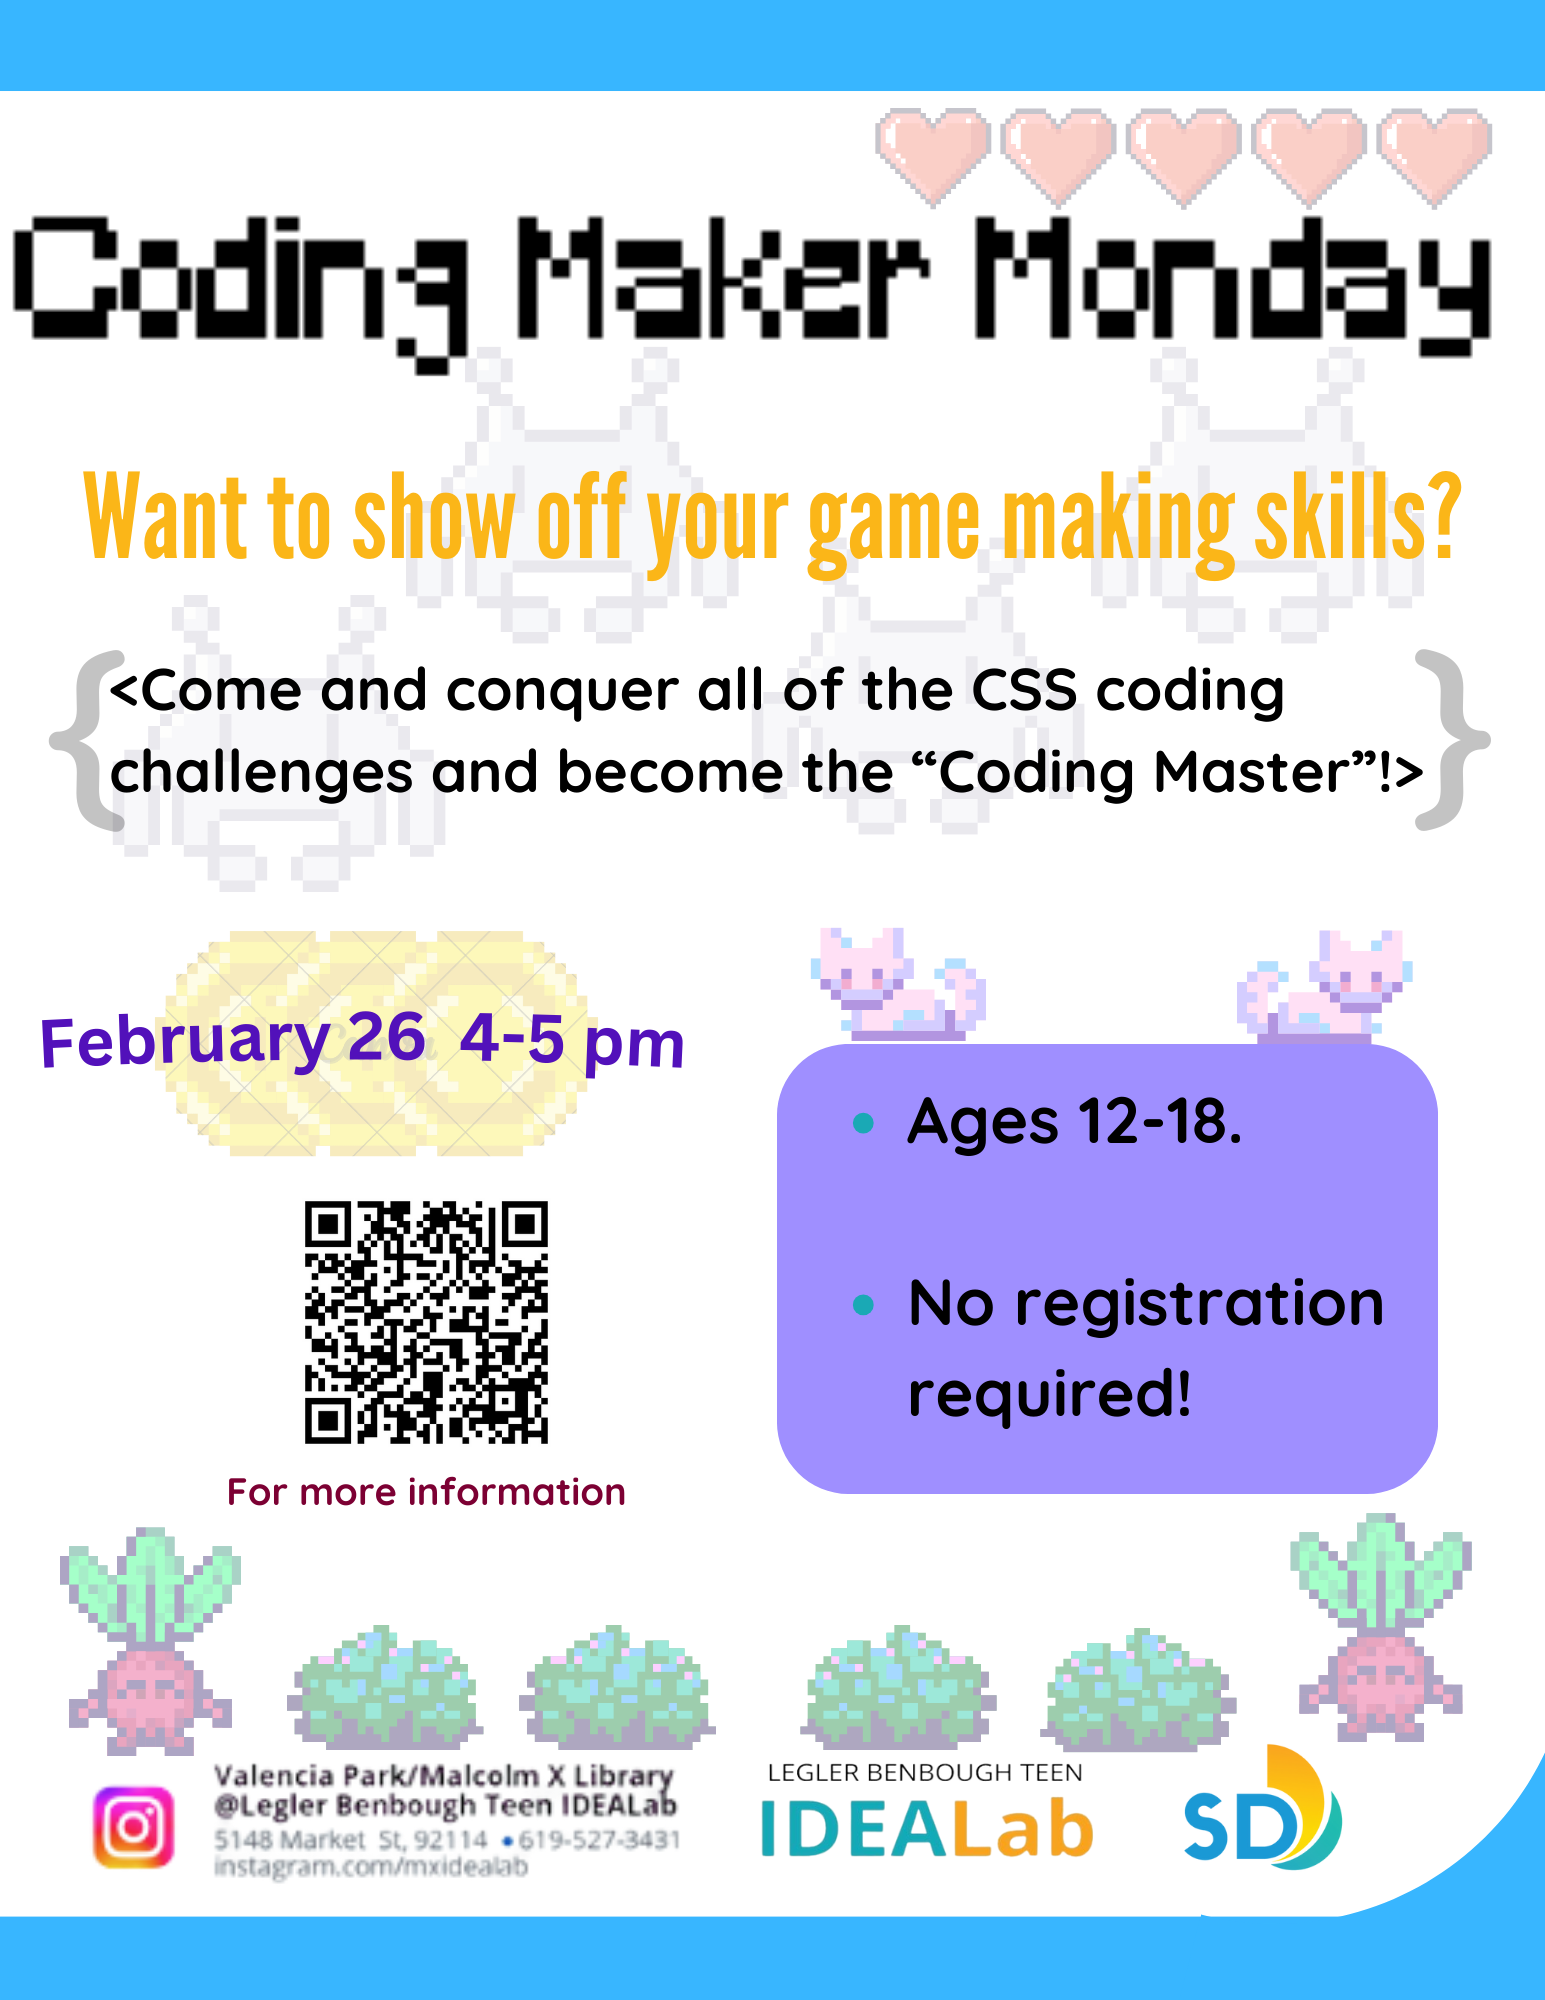 Want to show off your game making skills? Come and conquer all of the CSS coding challenges and become the “Coding Master”!